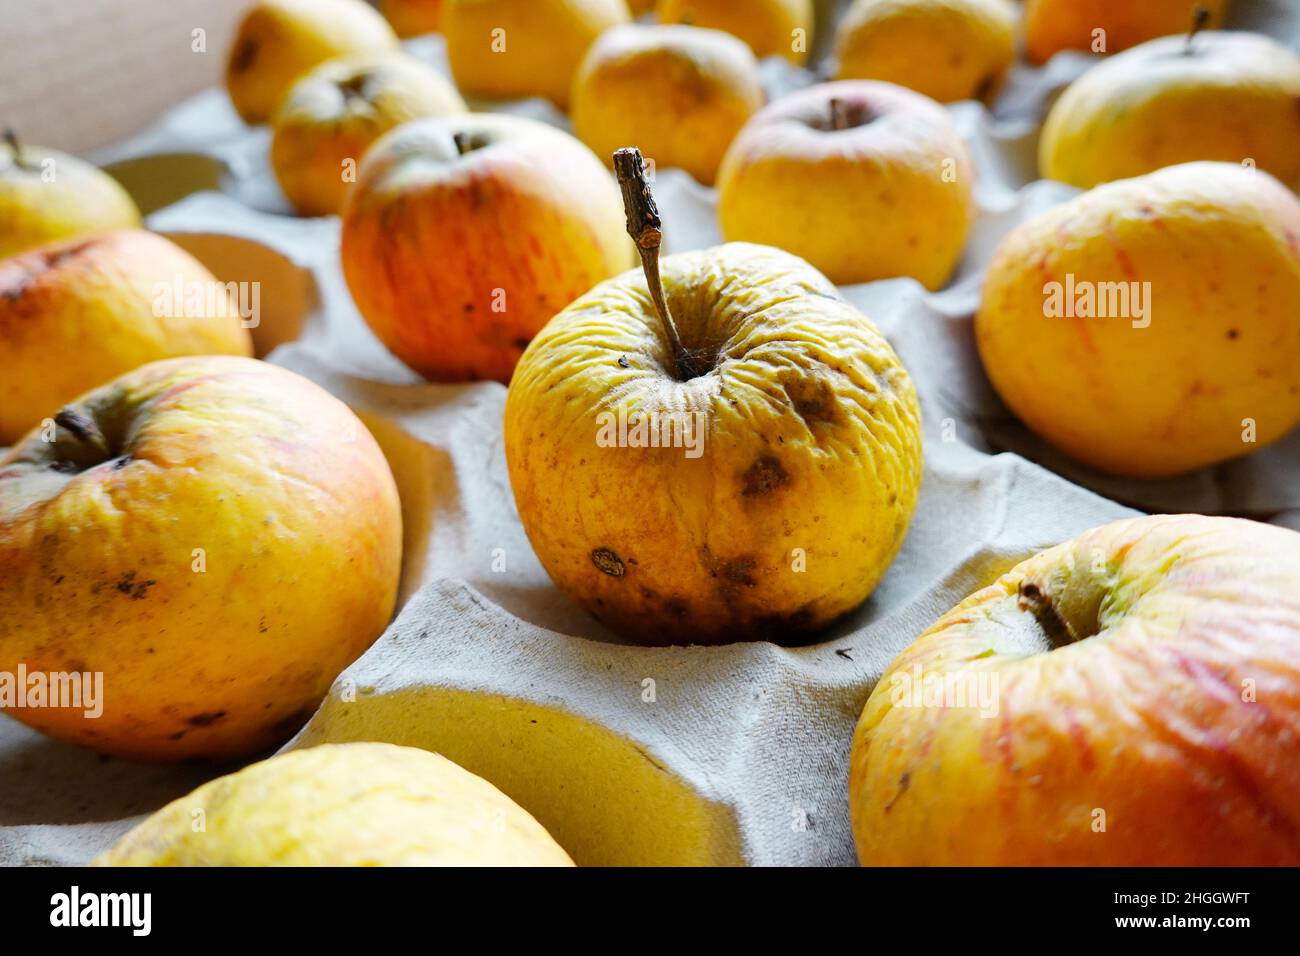 https://c8.alamy.com/comp/2HGGWFT/apple-malus-domestica-store-old-shrivelled-and-untreated-organic-apples-on-a-cardboard-base-germany-2HGGWFT.jpg